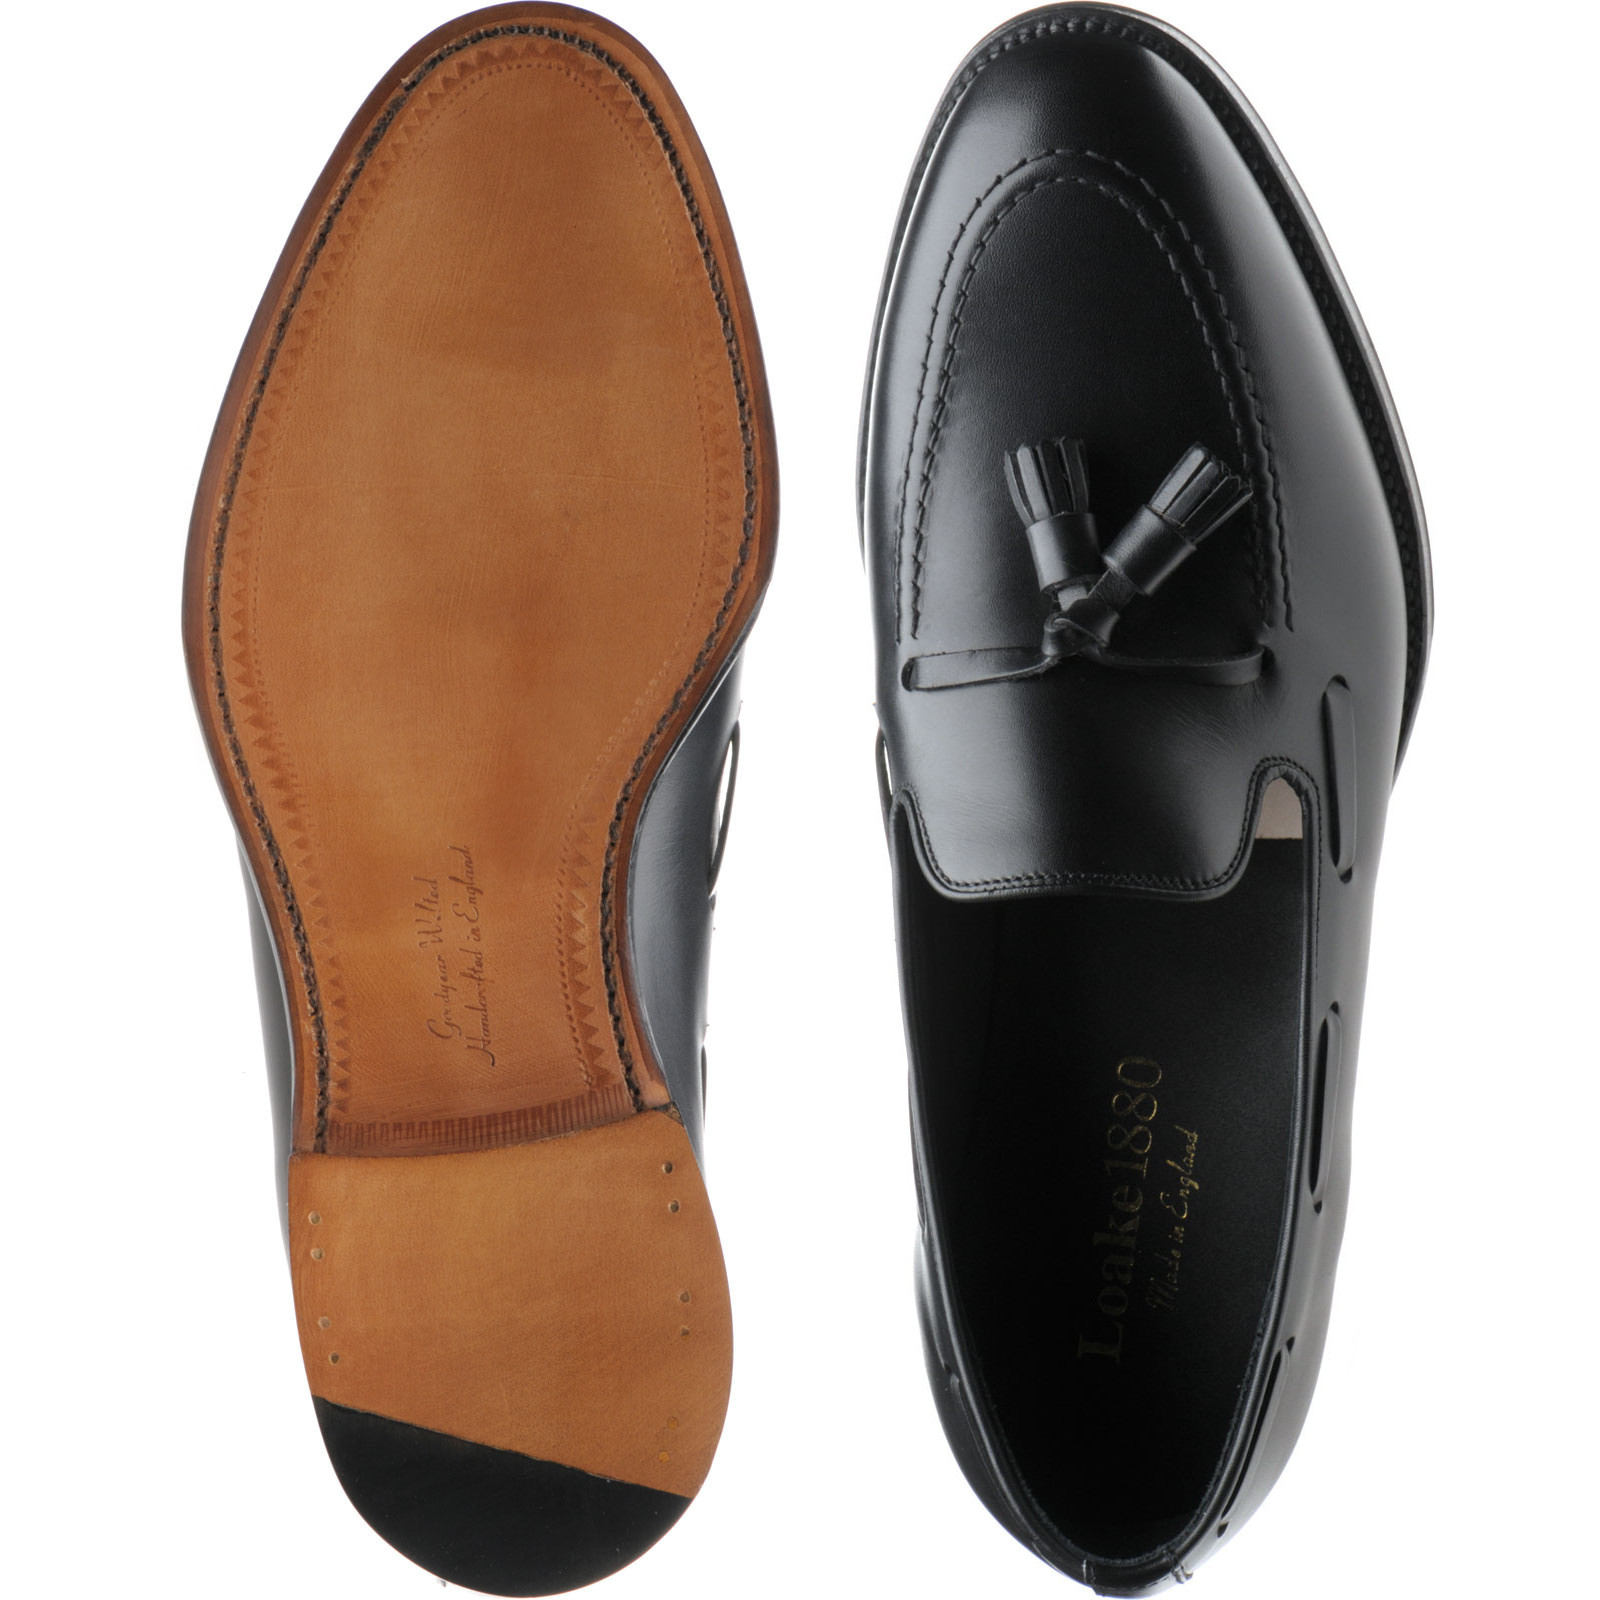 Loake shoes | Loake 1880 Classic | Russell tasselled loafers in Black ...